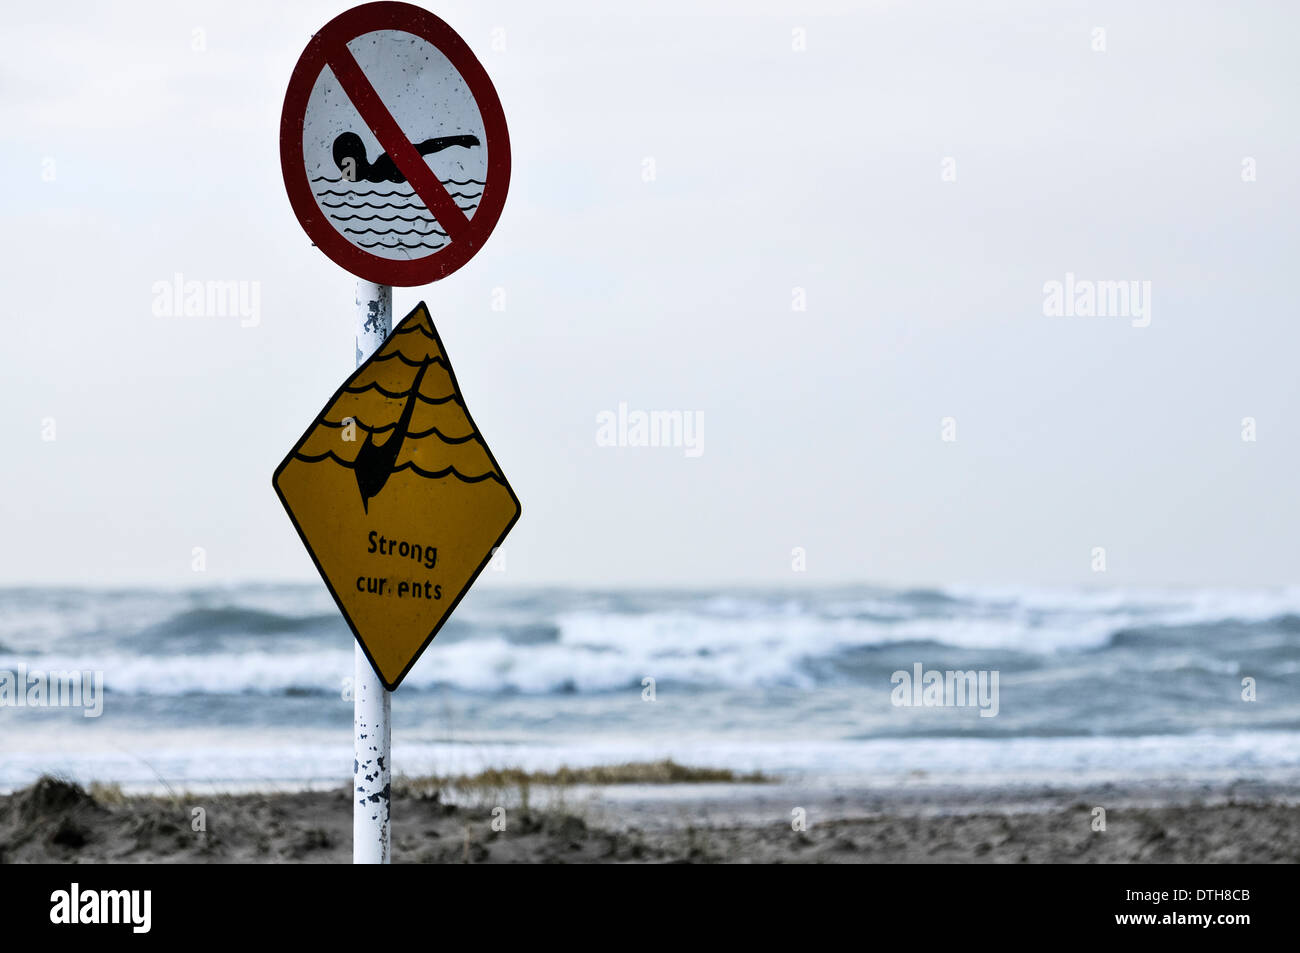 Sign warning of strong currents, and prohibiting swimming against a stormy sea Stock Photo